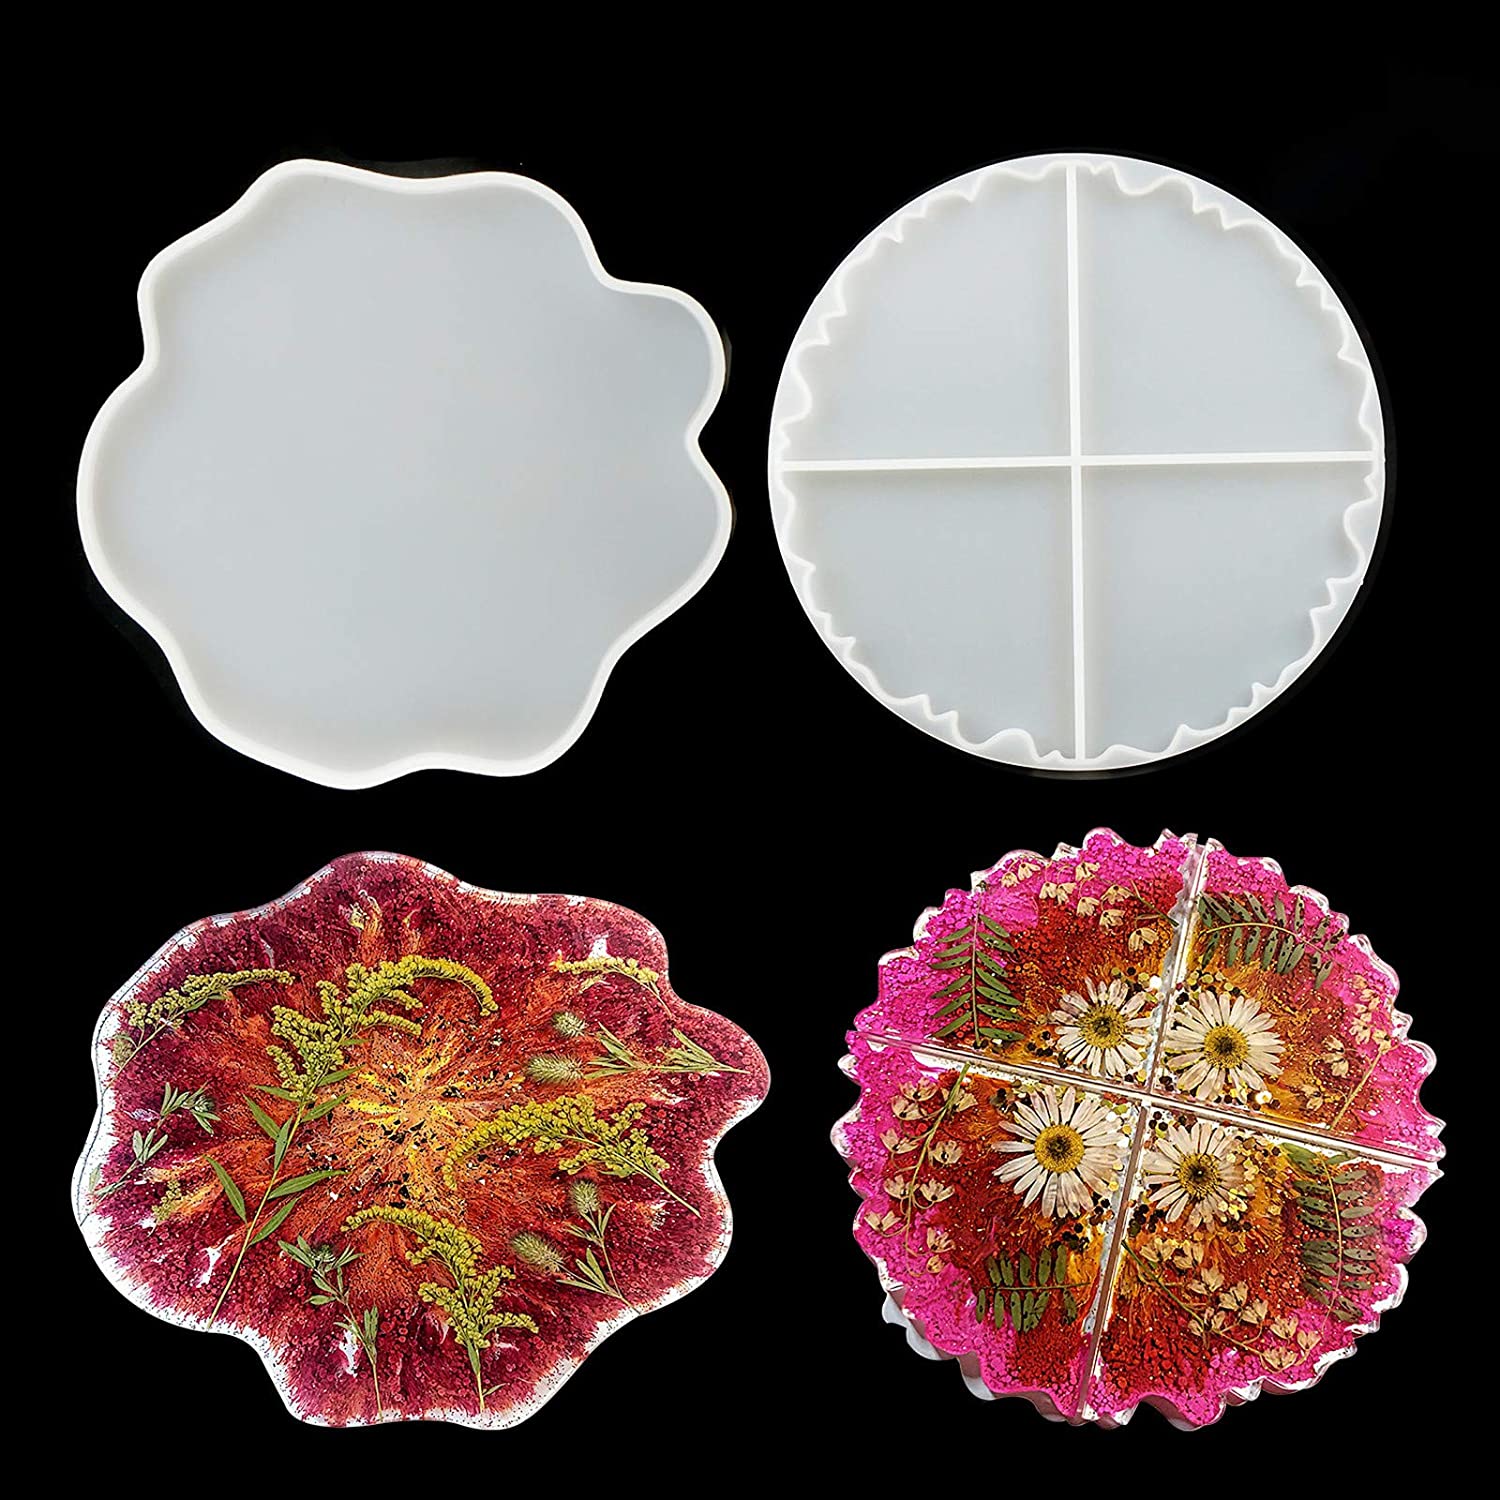 Silicone Resin Coaster Moulds, Glossy Geode Silicone Moulds and Puzzle Agate Coaster Moulds, Epoxy Resin Molds for Making